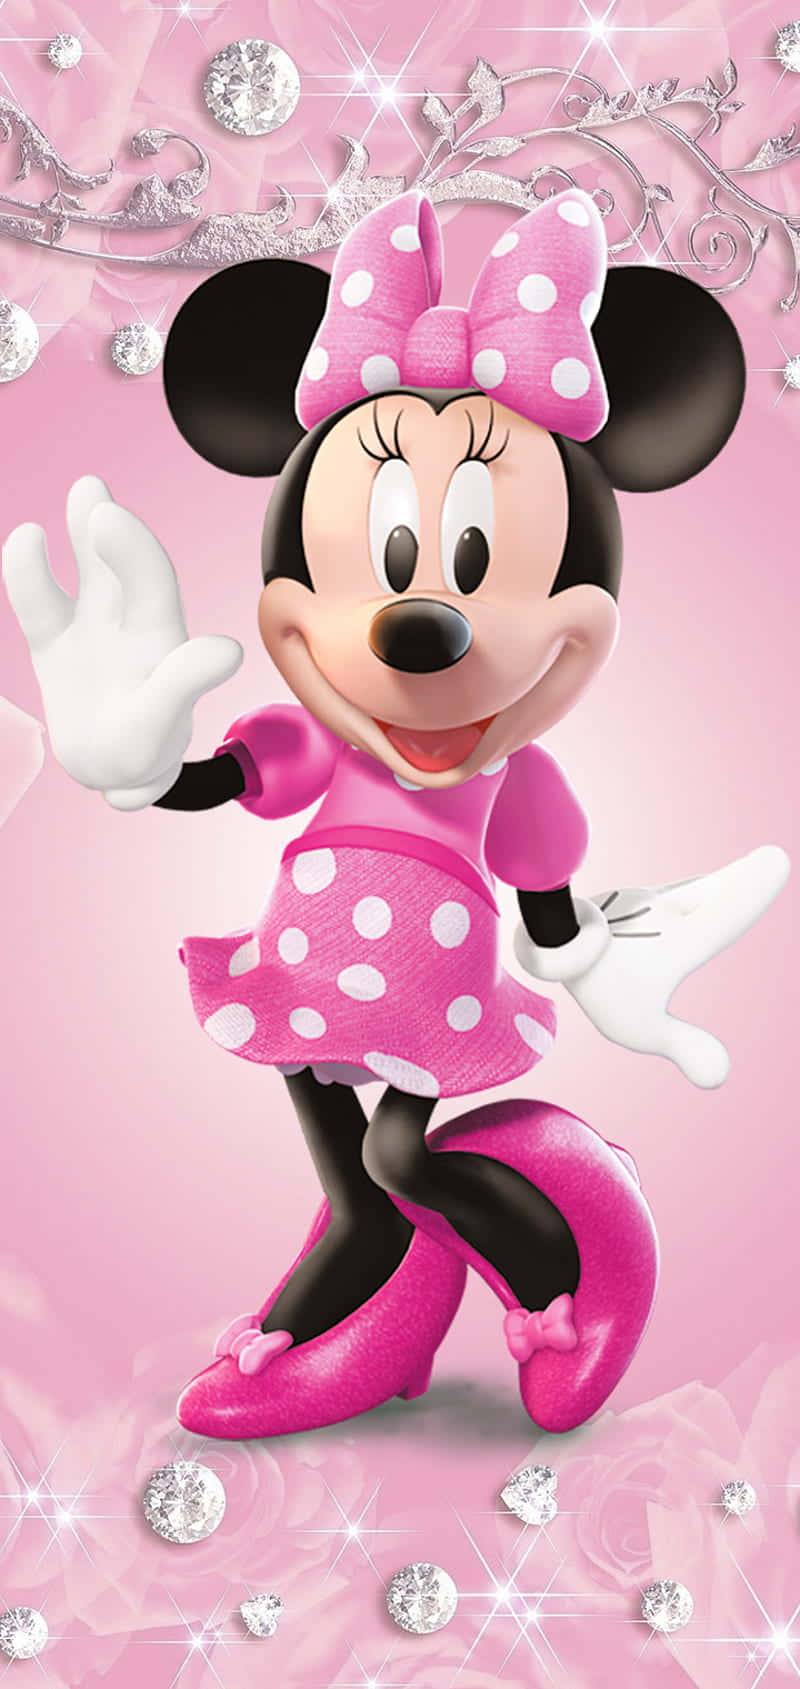 Adorable Minnie Mouse Sporting Her Signature Pink Color Wallpaper